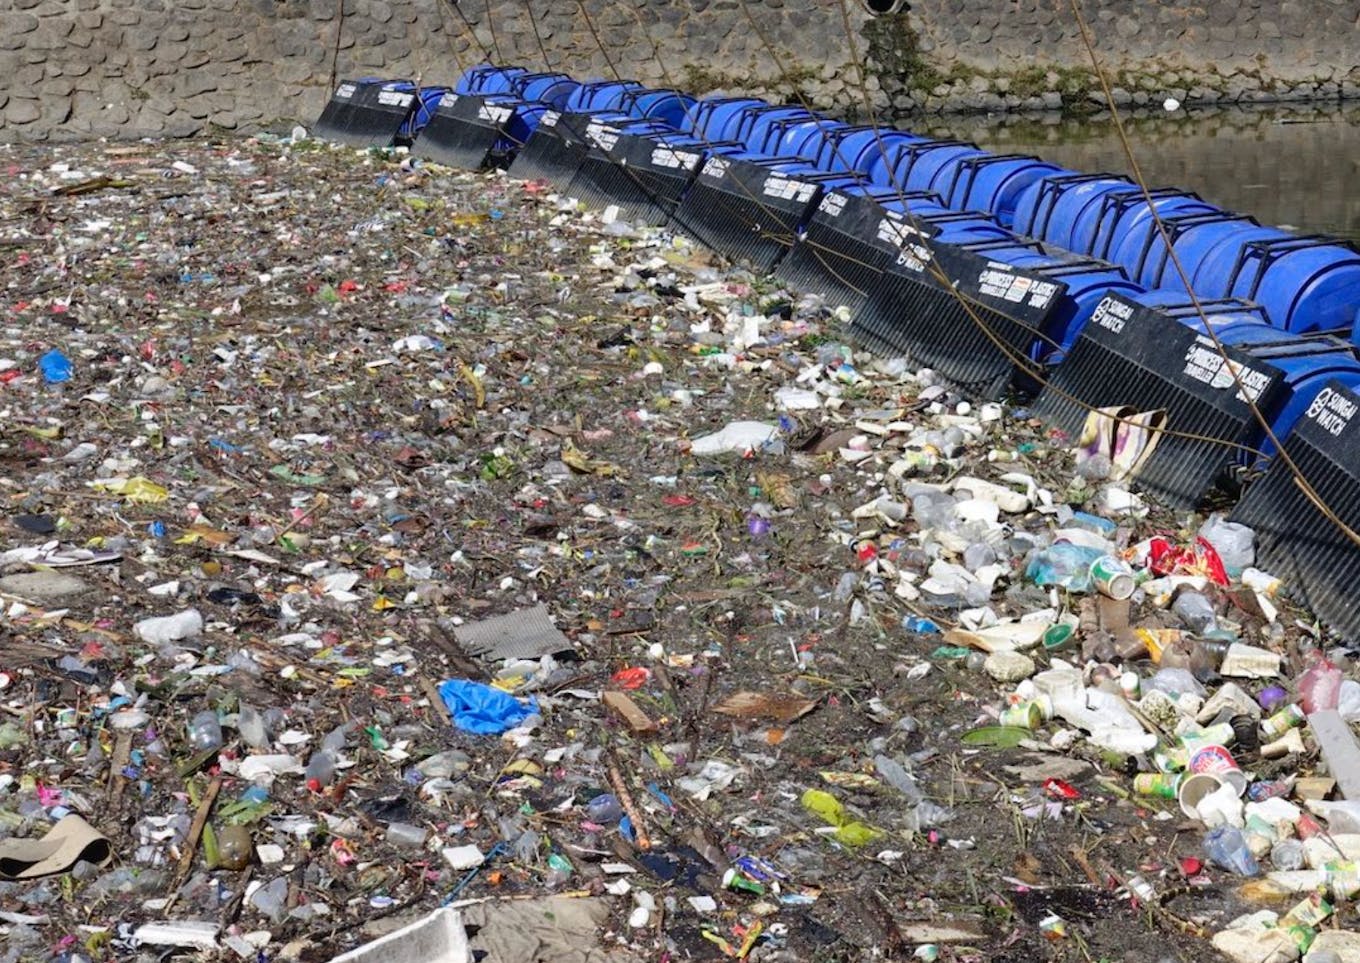 A Sungai Watch river barrier in Indonesia. One quarter of all PET bottles chucked into Indonesian rivers are Aqua branded. Image: Sungai Watch